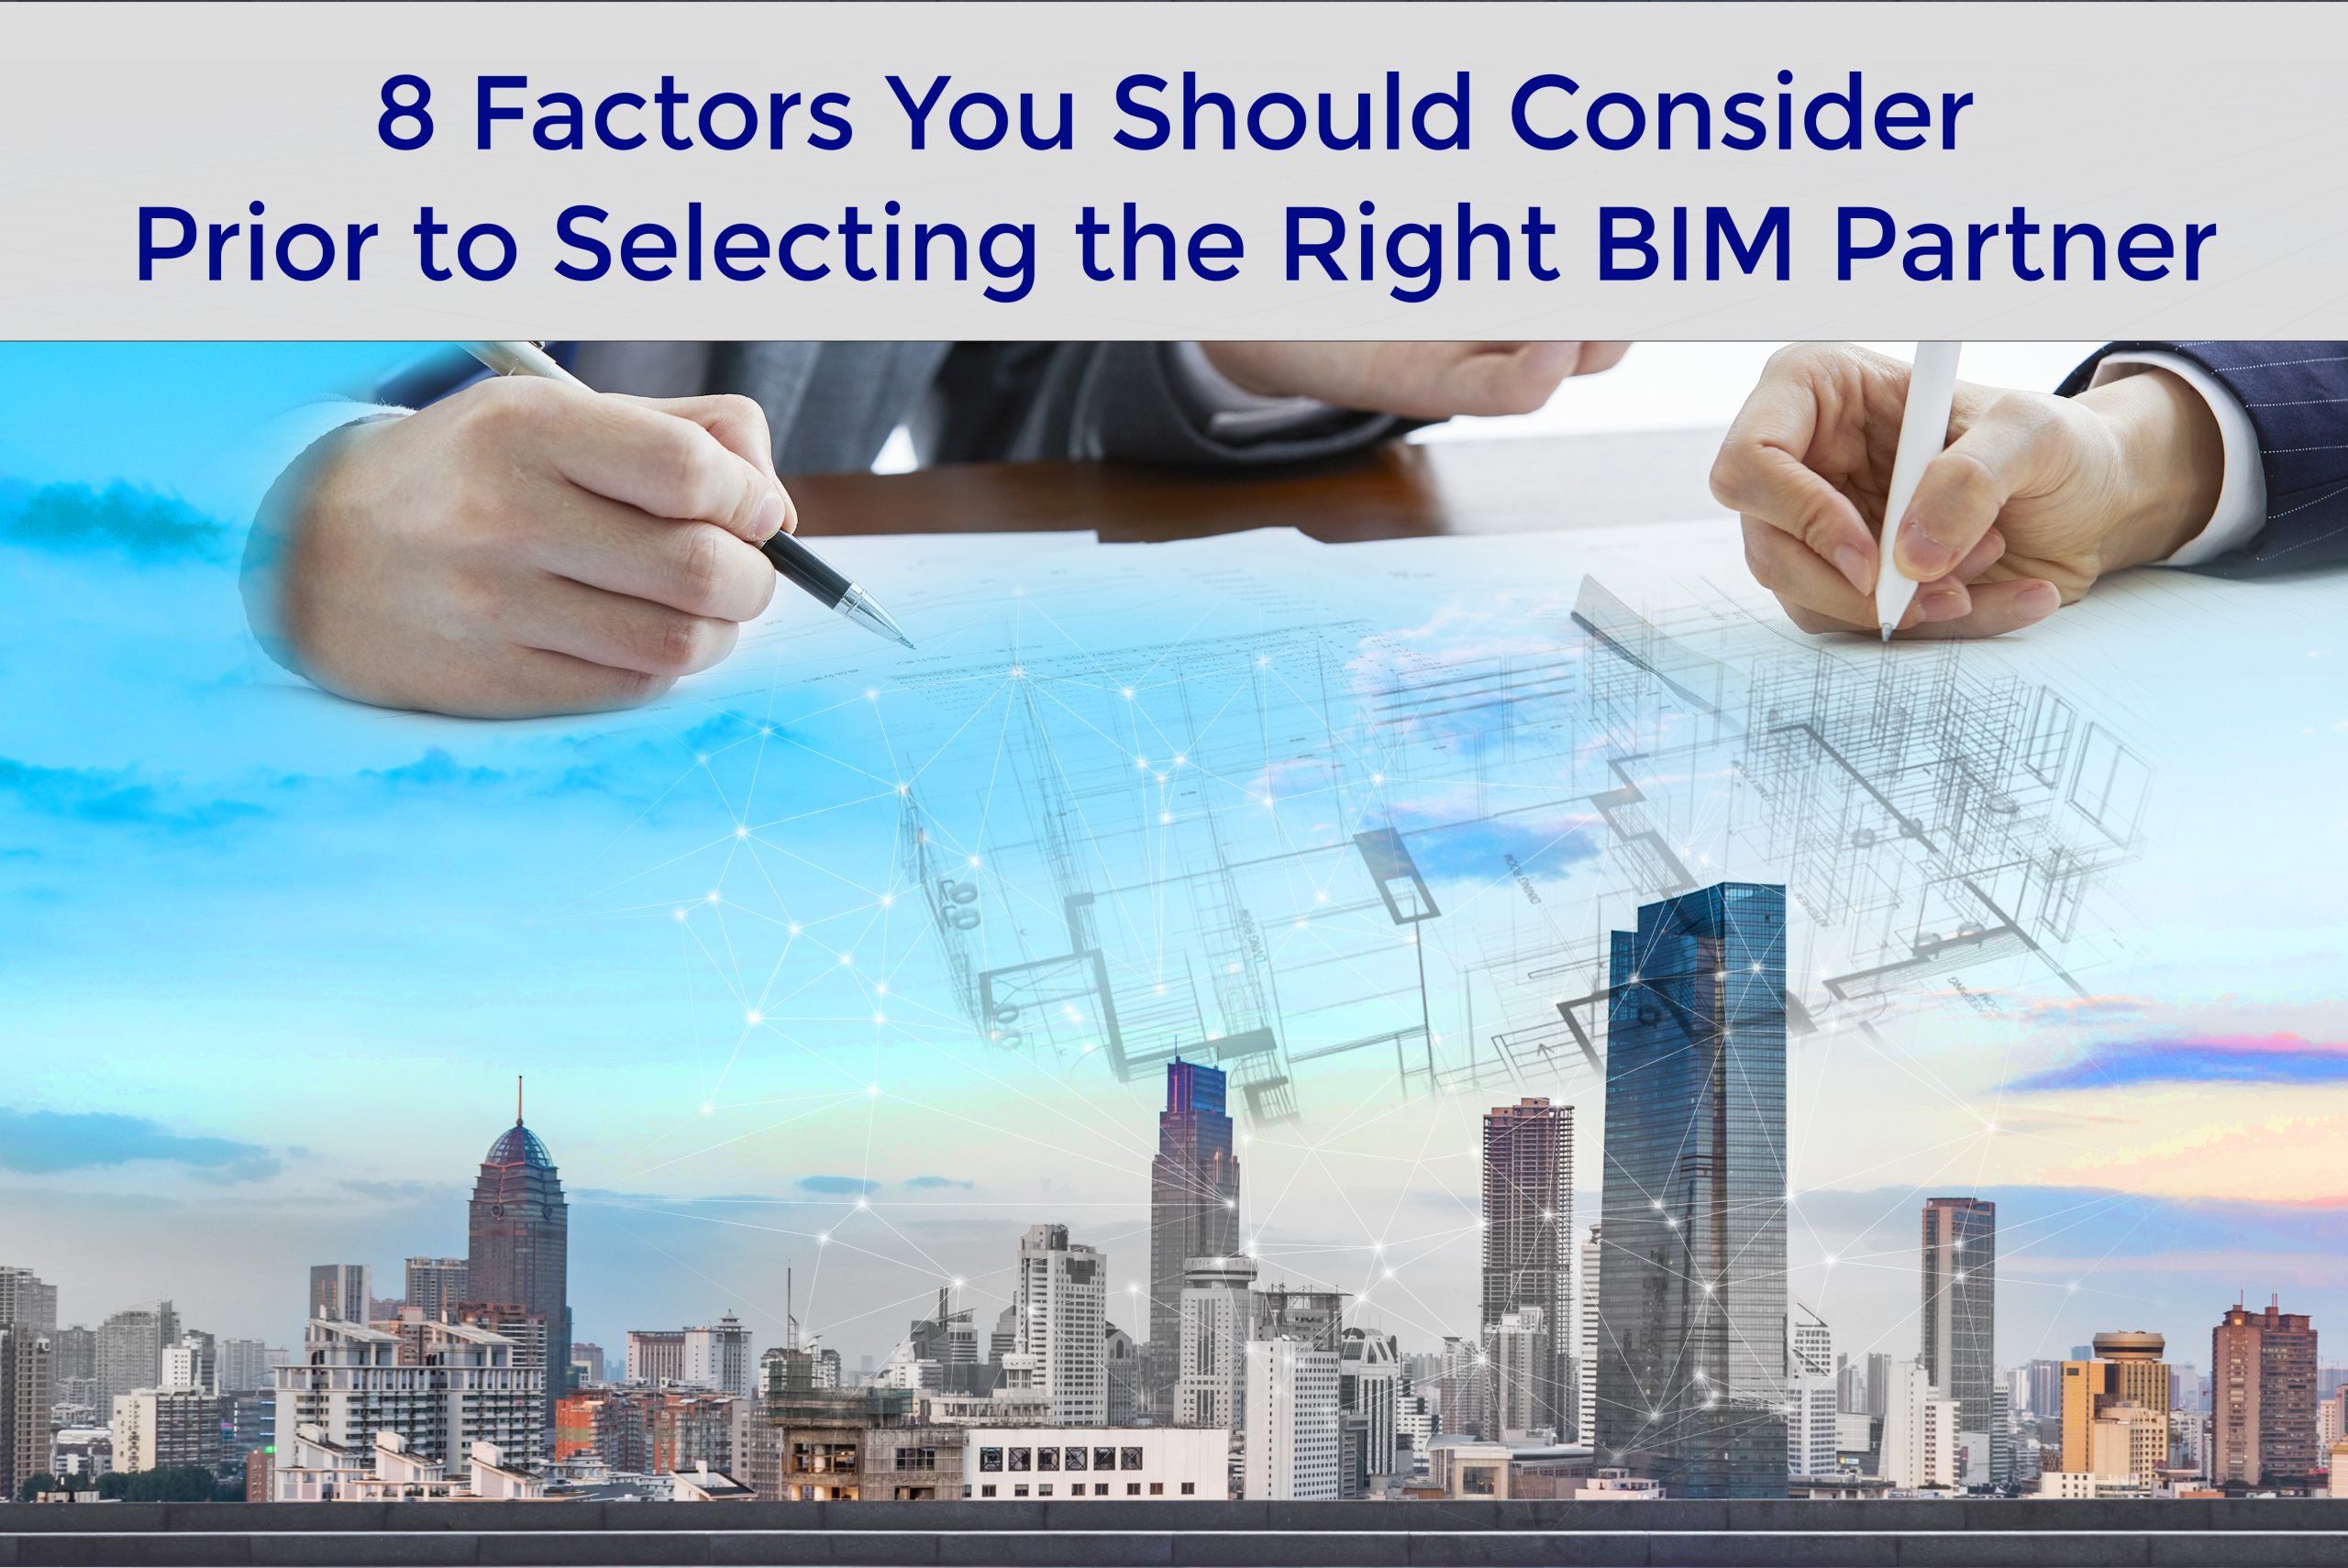 8 Factors You Should Consider Prior to Selecting the Right BIM Partner